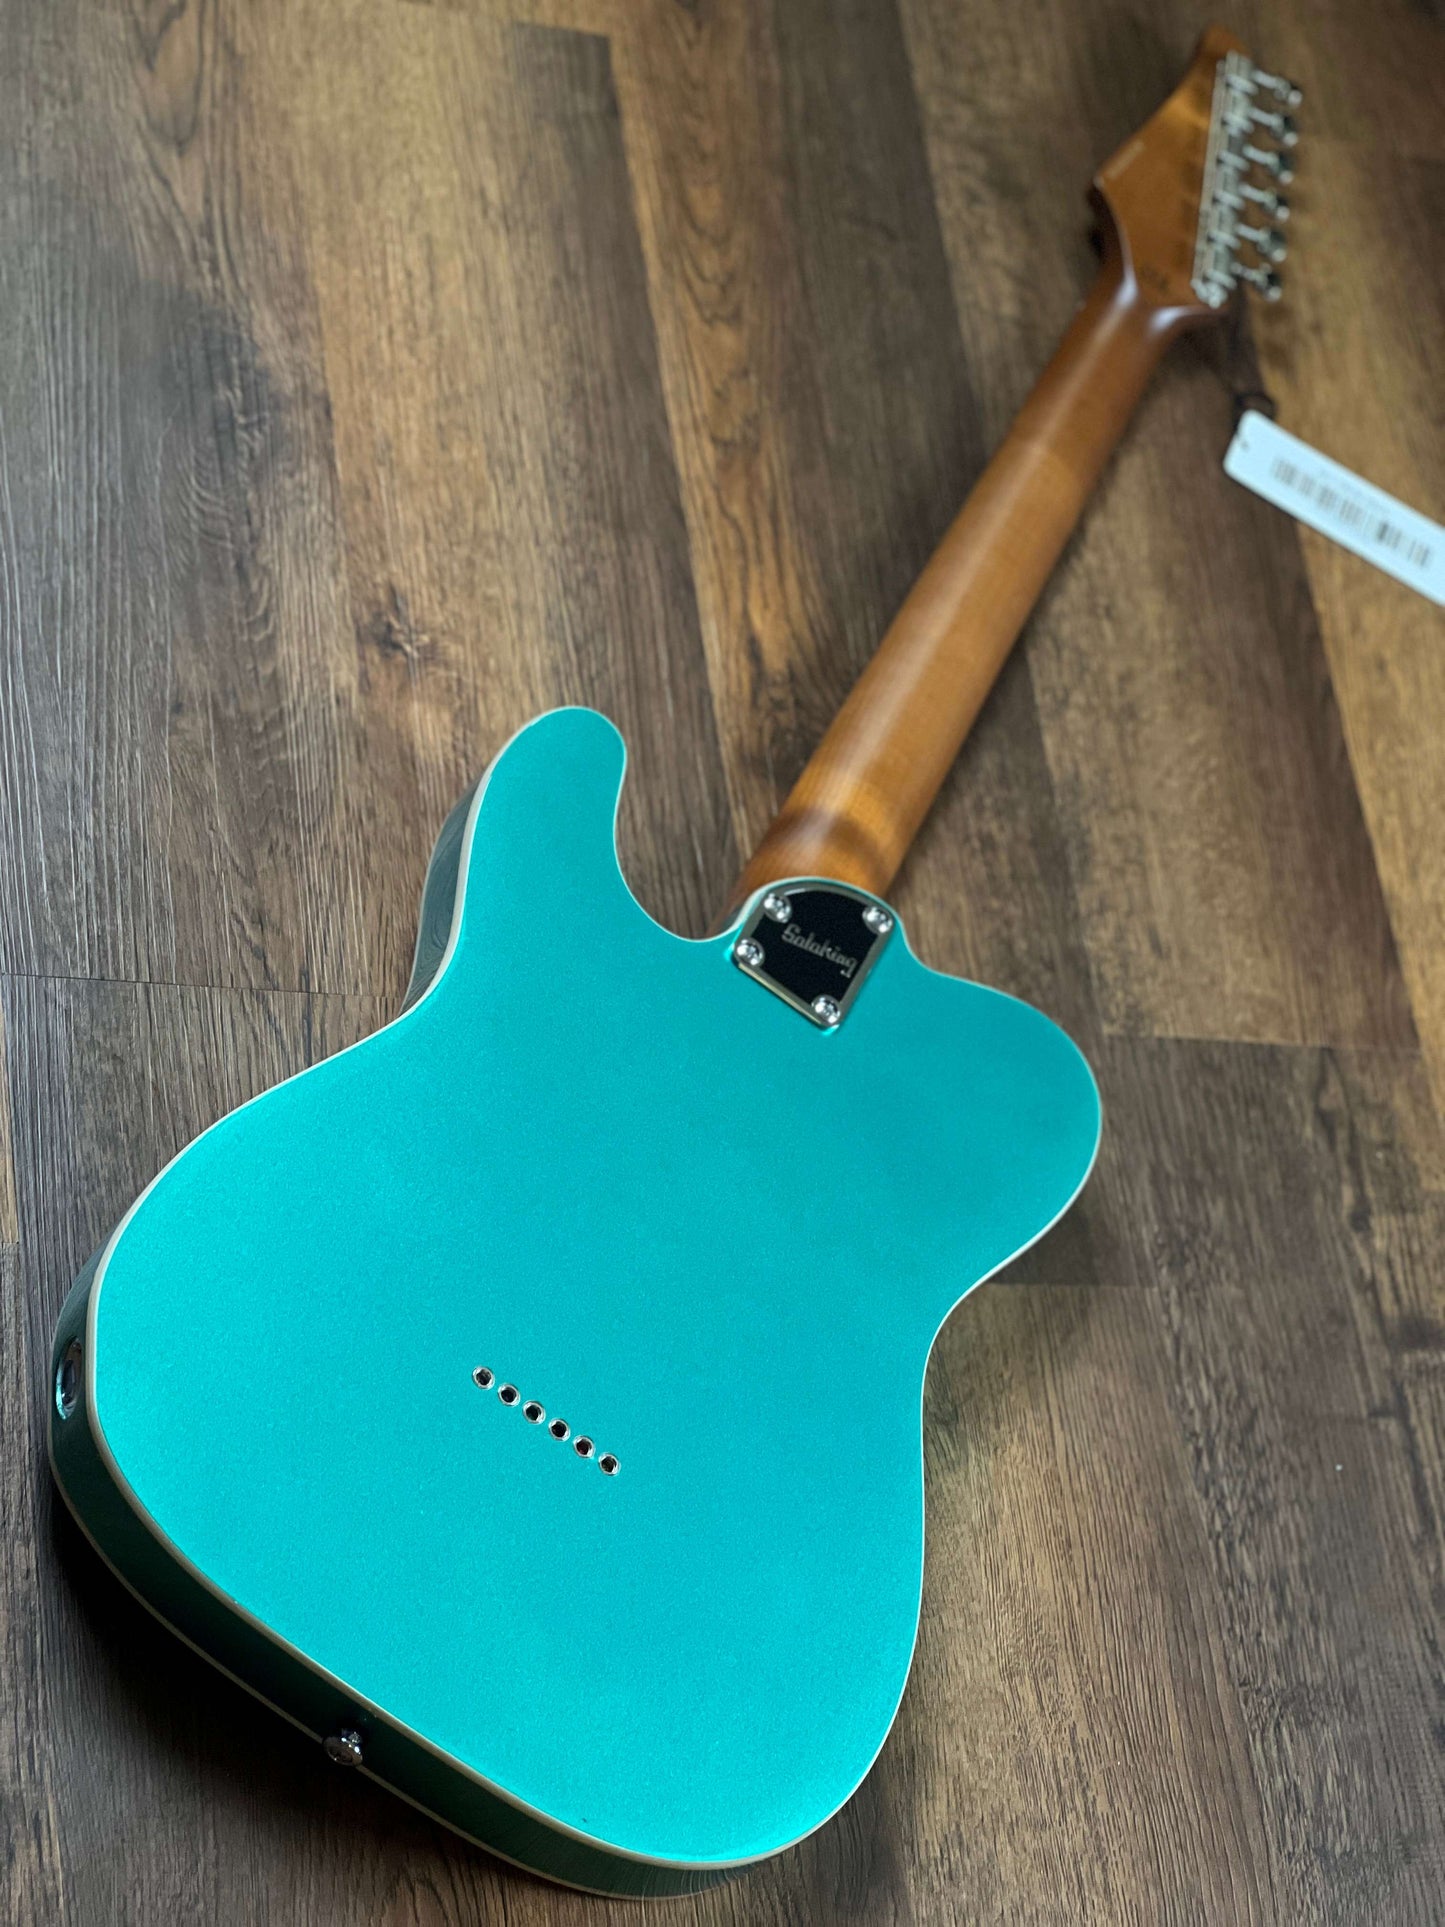 Soloking T-1B Vintage MKII with Roasted Maple Neck and Rosewood FB in Sherwood Green Metallic